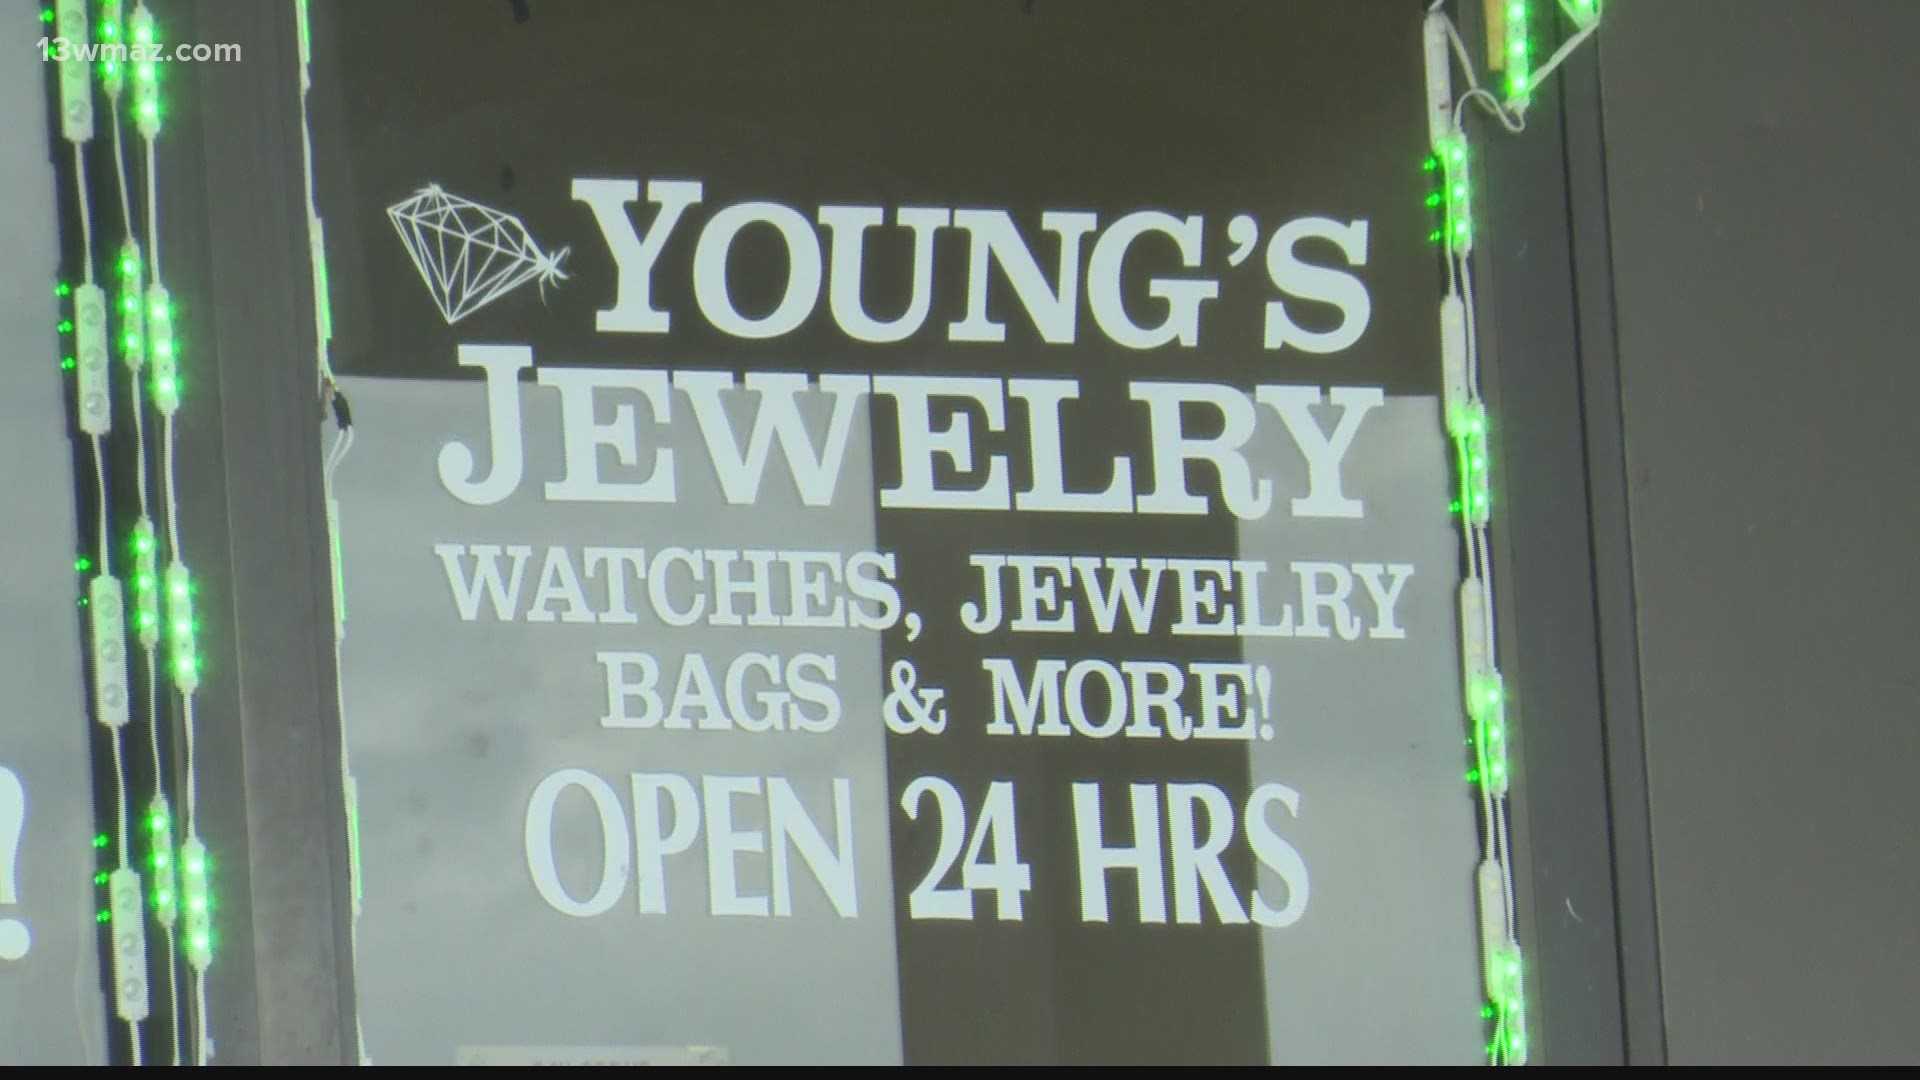 Bibb deputies are investigating the early morning robbery of a north Macon jewelry store